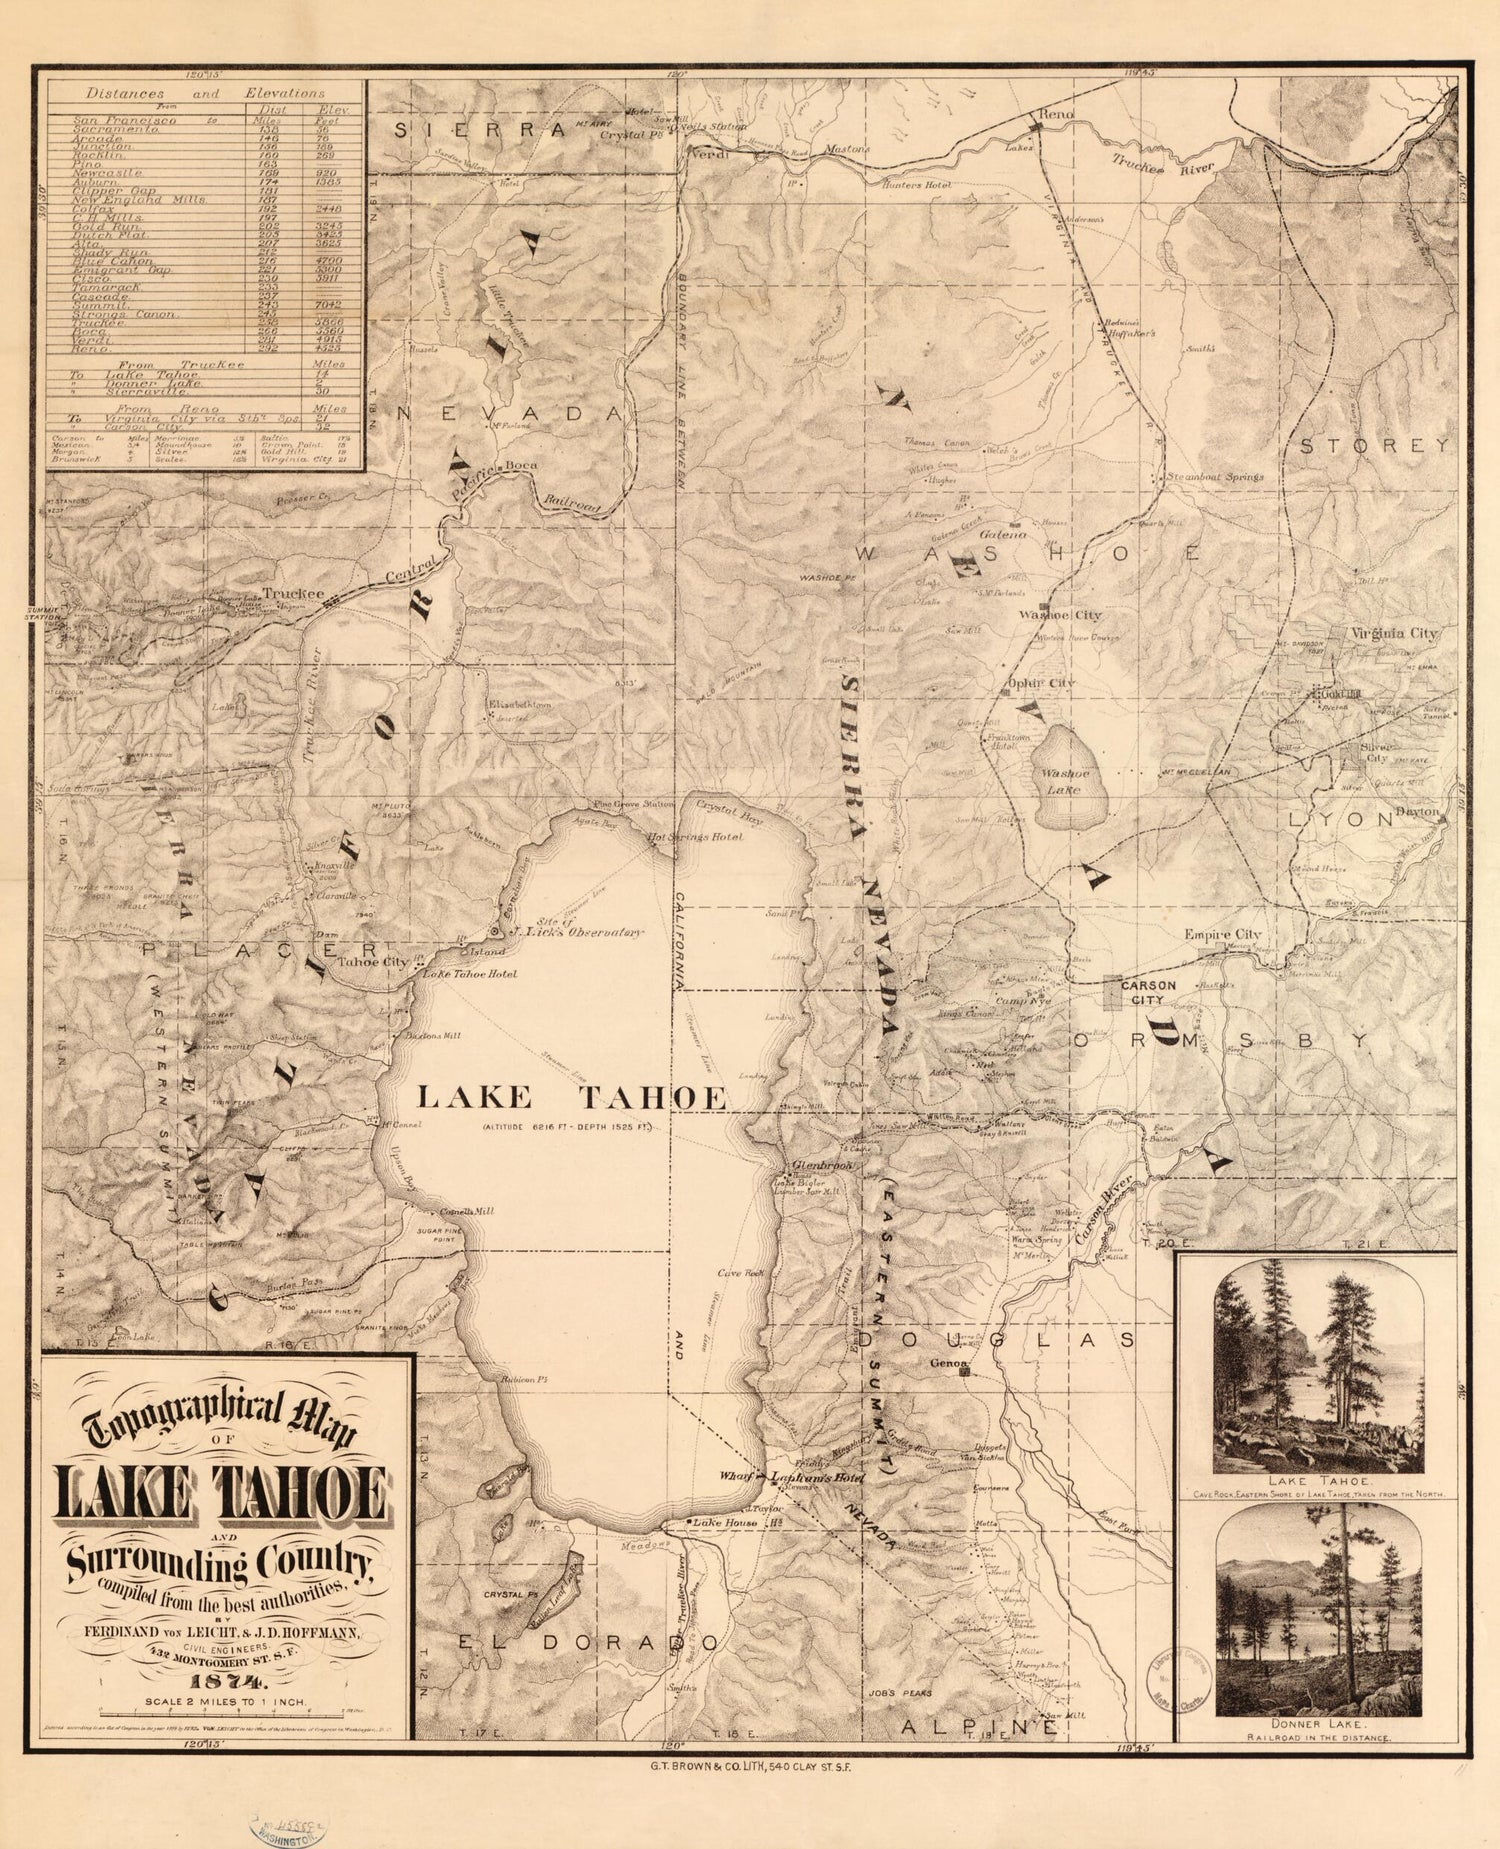 This old map of Topographical Map of Lake Tahoe and Surrounding Country from 1874 was created by Ferdinand Von Leicht in 1874